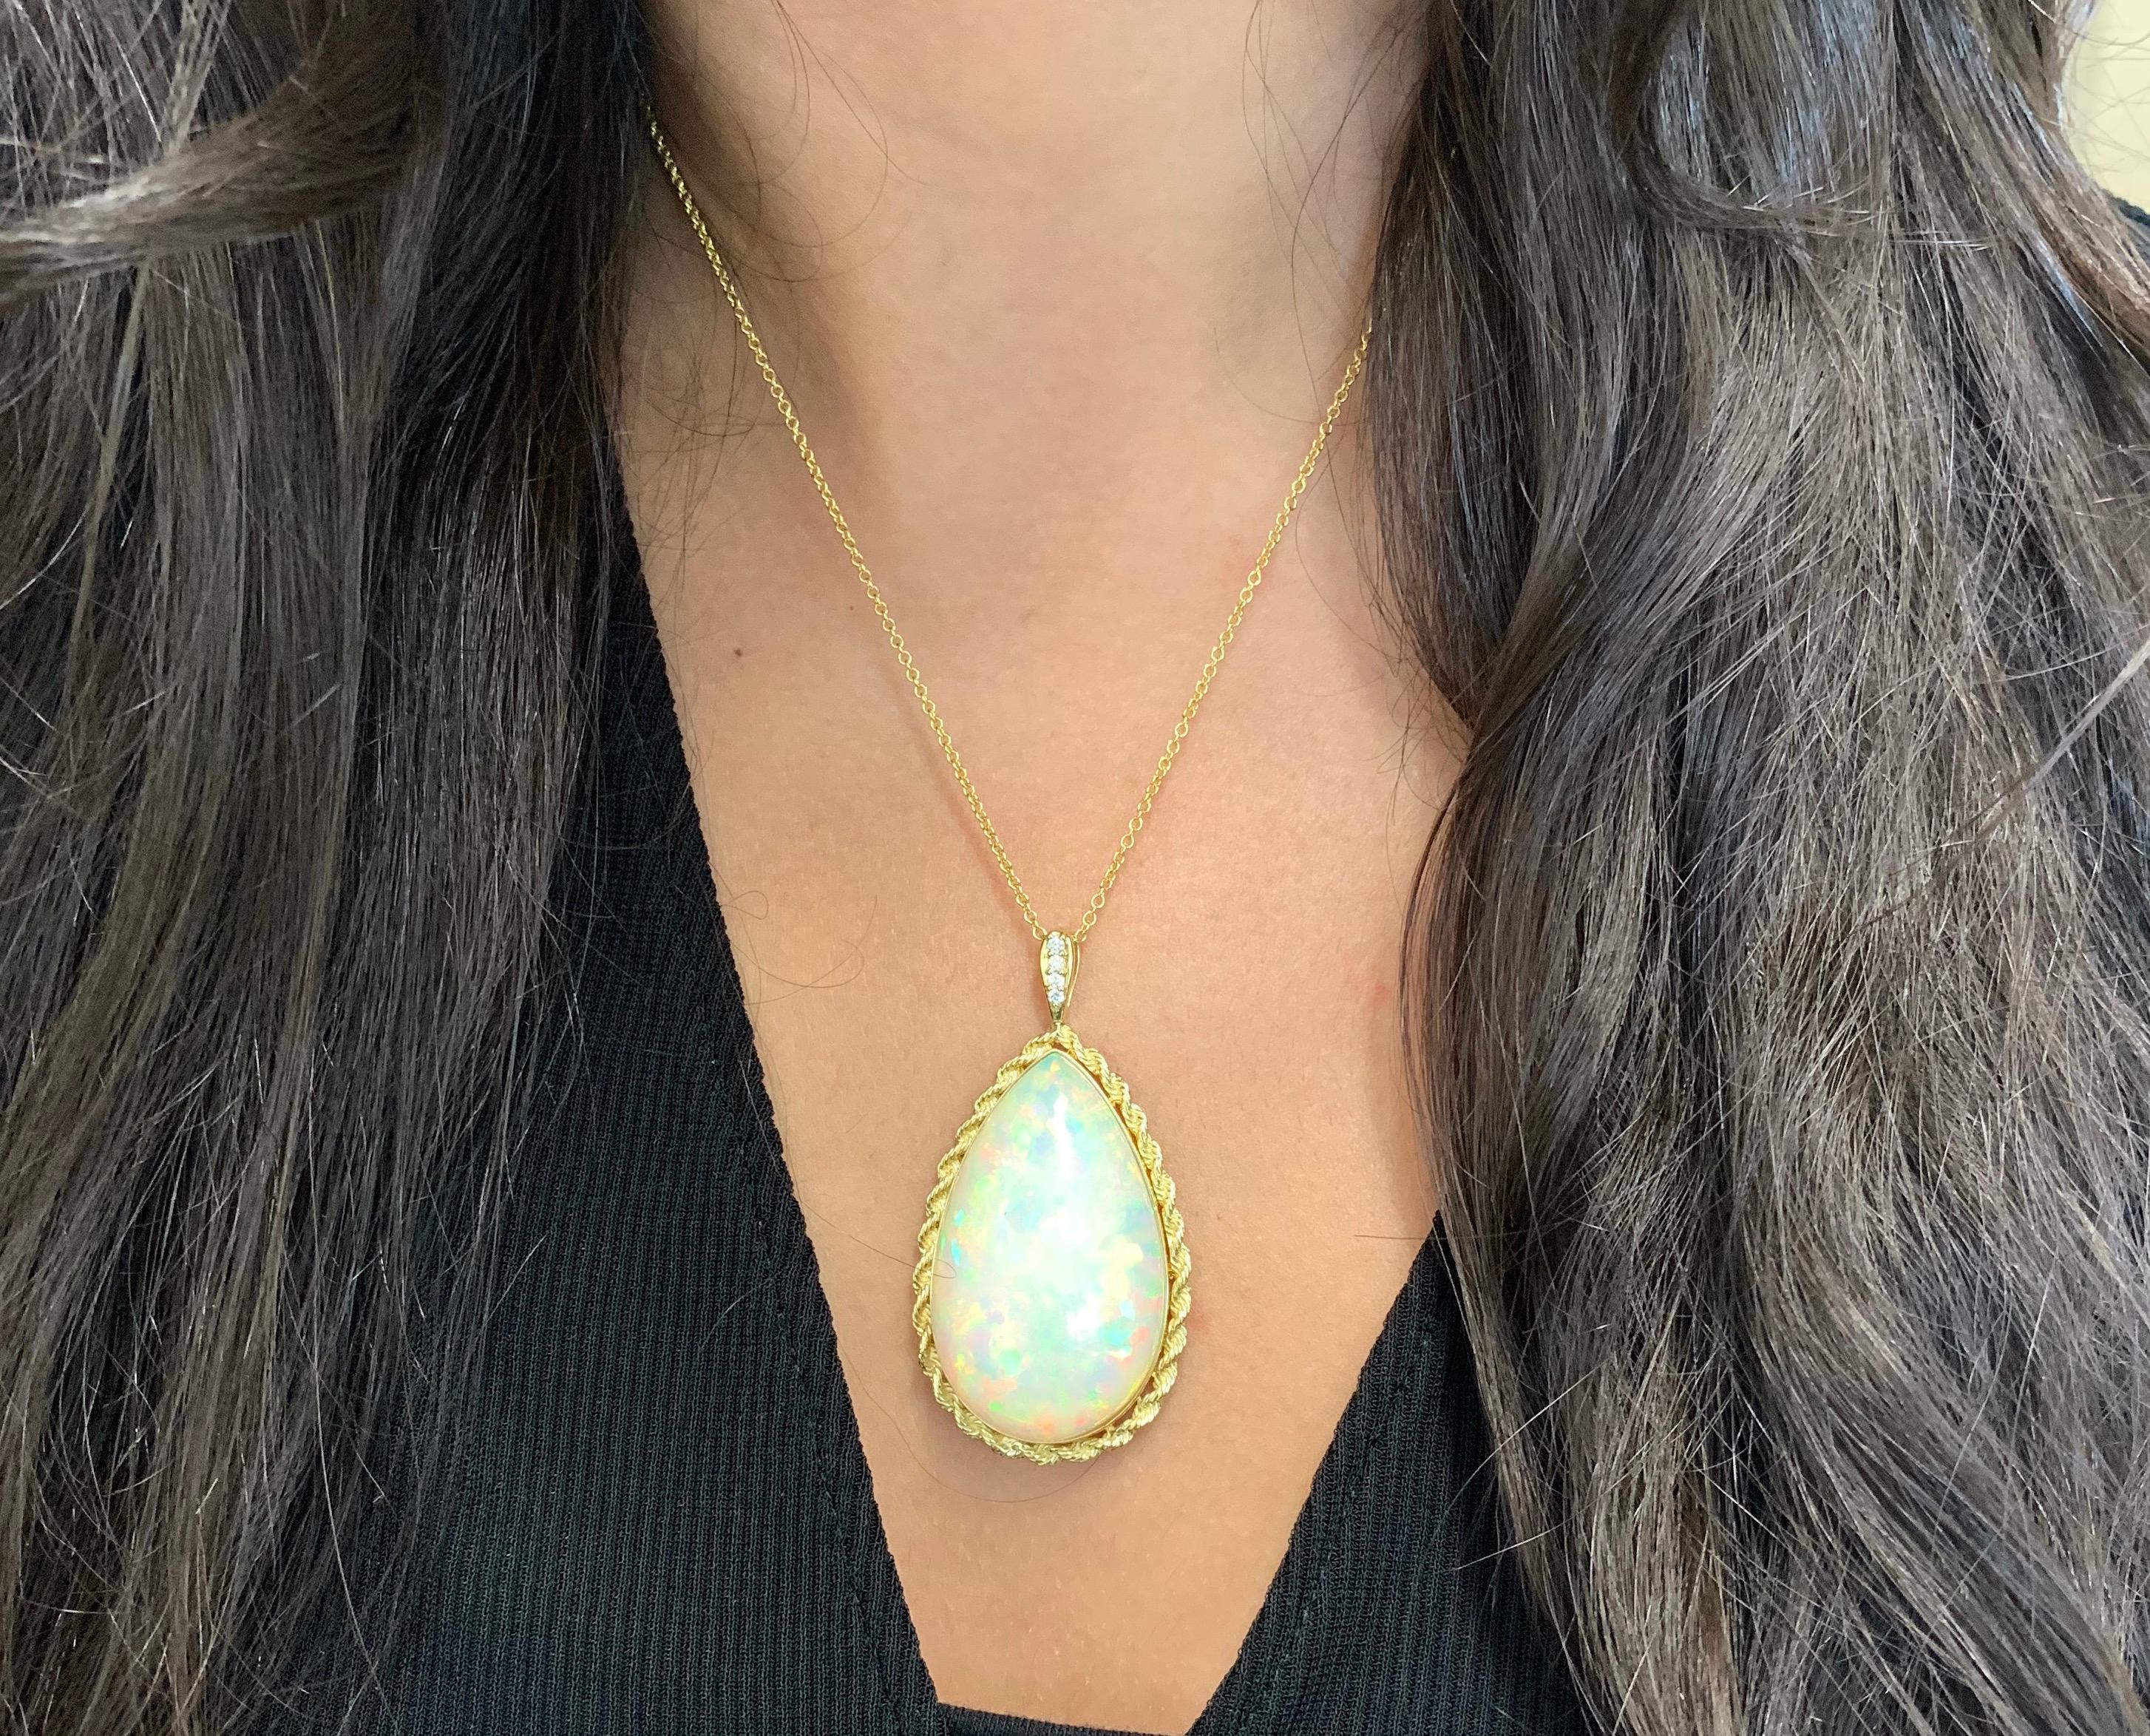 Material: 18K Yellow Gold 
Center Stone Details: 50.80 Carat Pear Shaped Opal - 40 x 25 mm
Diamonds: 4 Round Diamonds at 0.10 Carats.  SI Quality /  H-I Color

Fine one-of-a-kind craftsmanship meets incredible quality in this breathtaking piece of